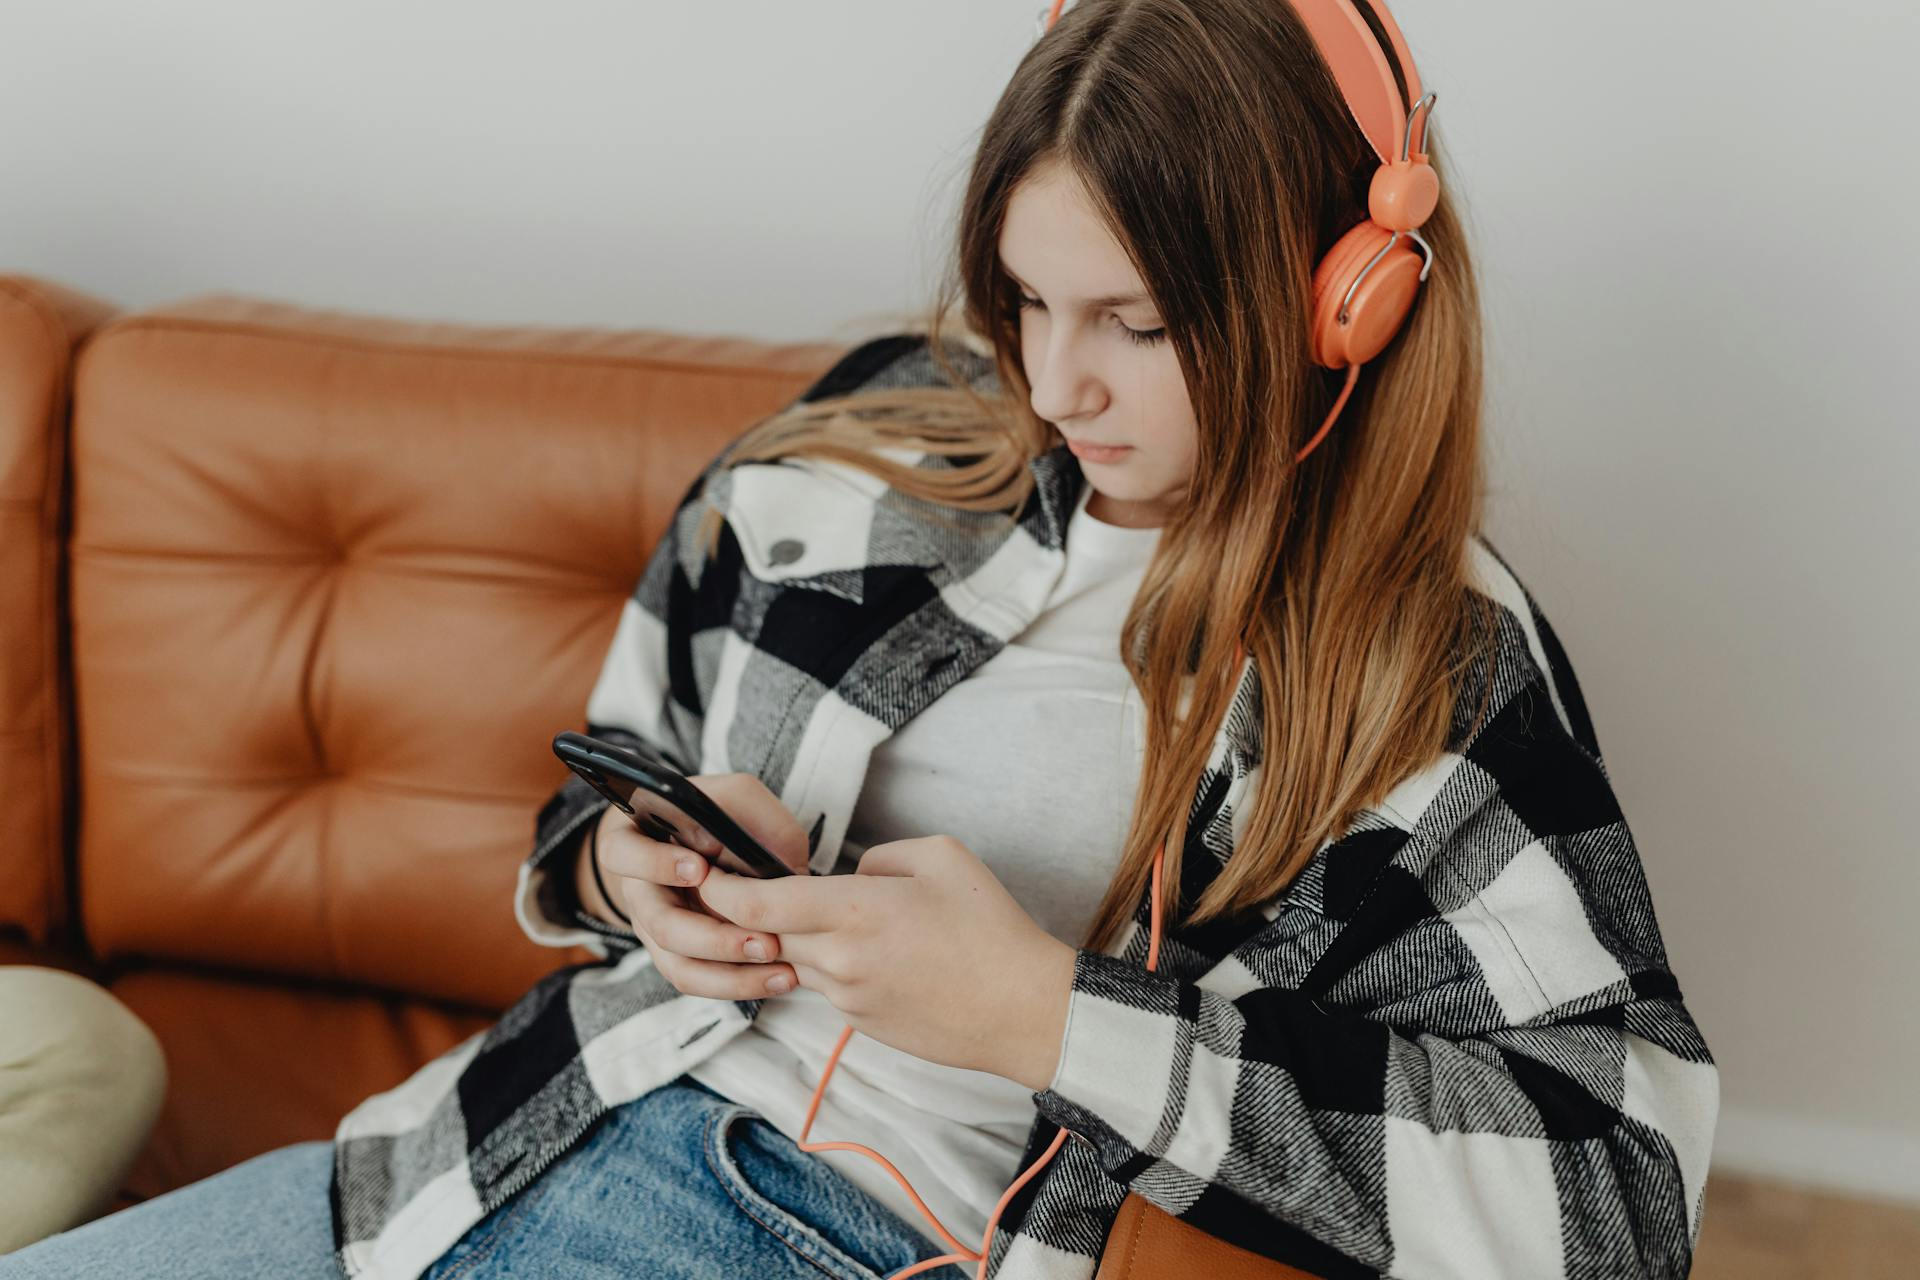 A young girl wearing headphones and using her phone | Source: Pexels